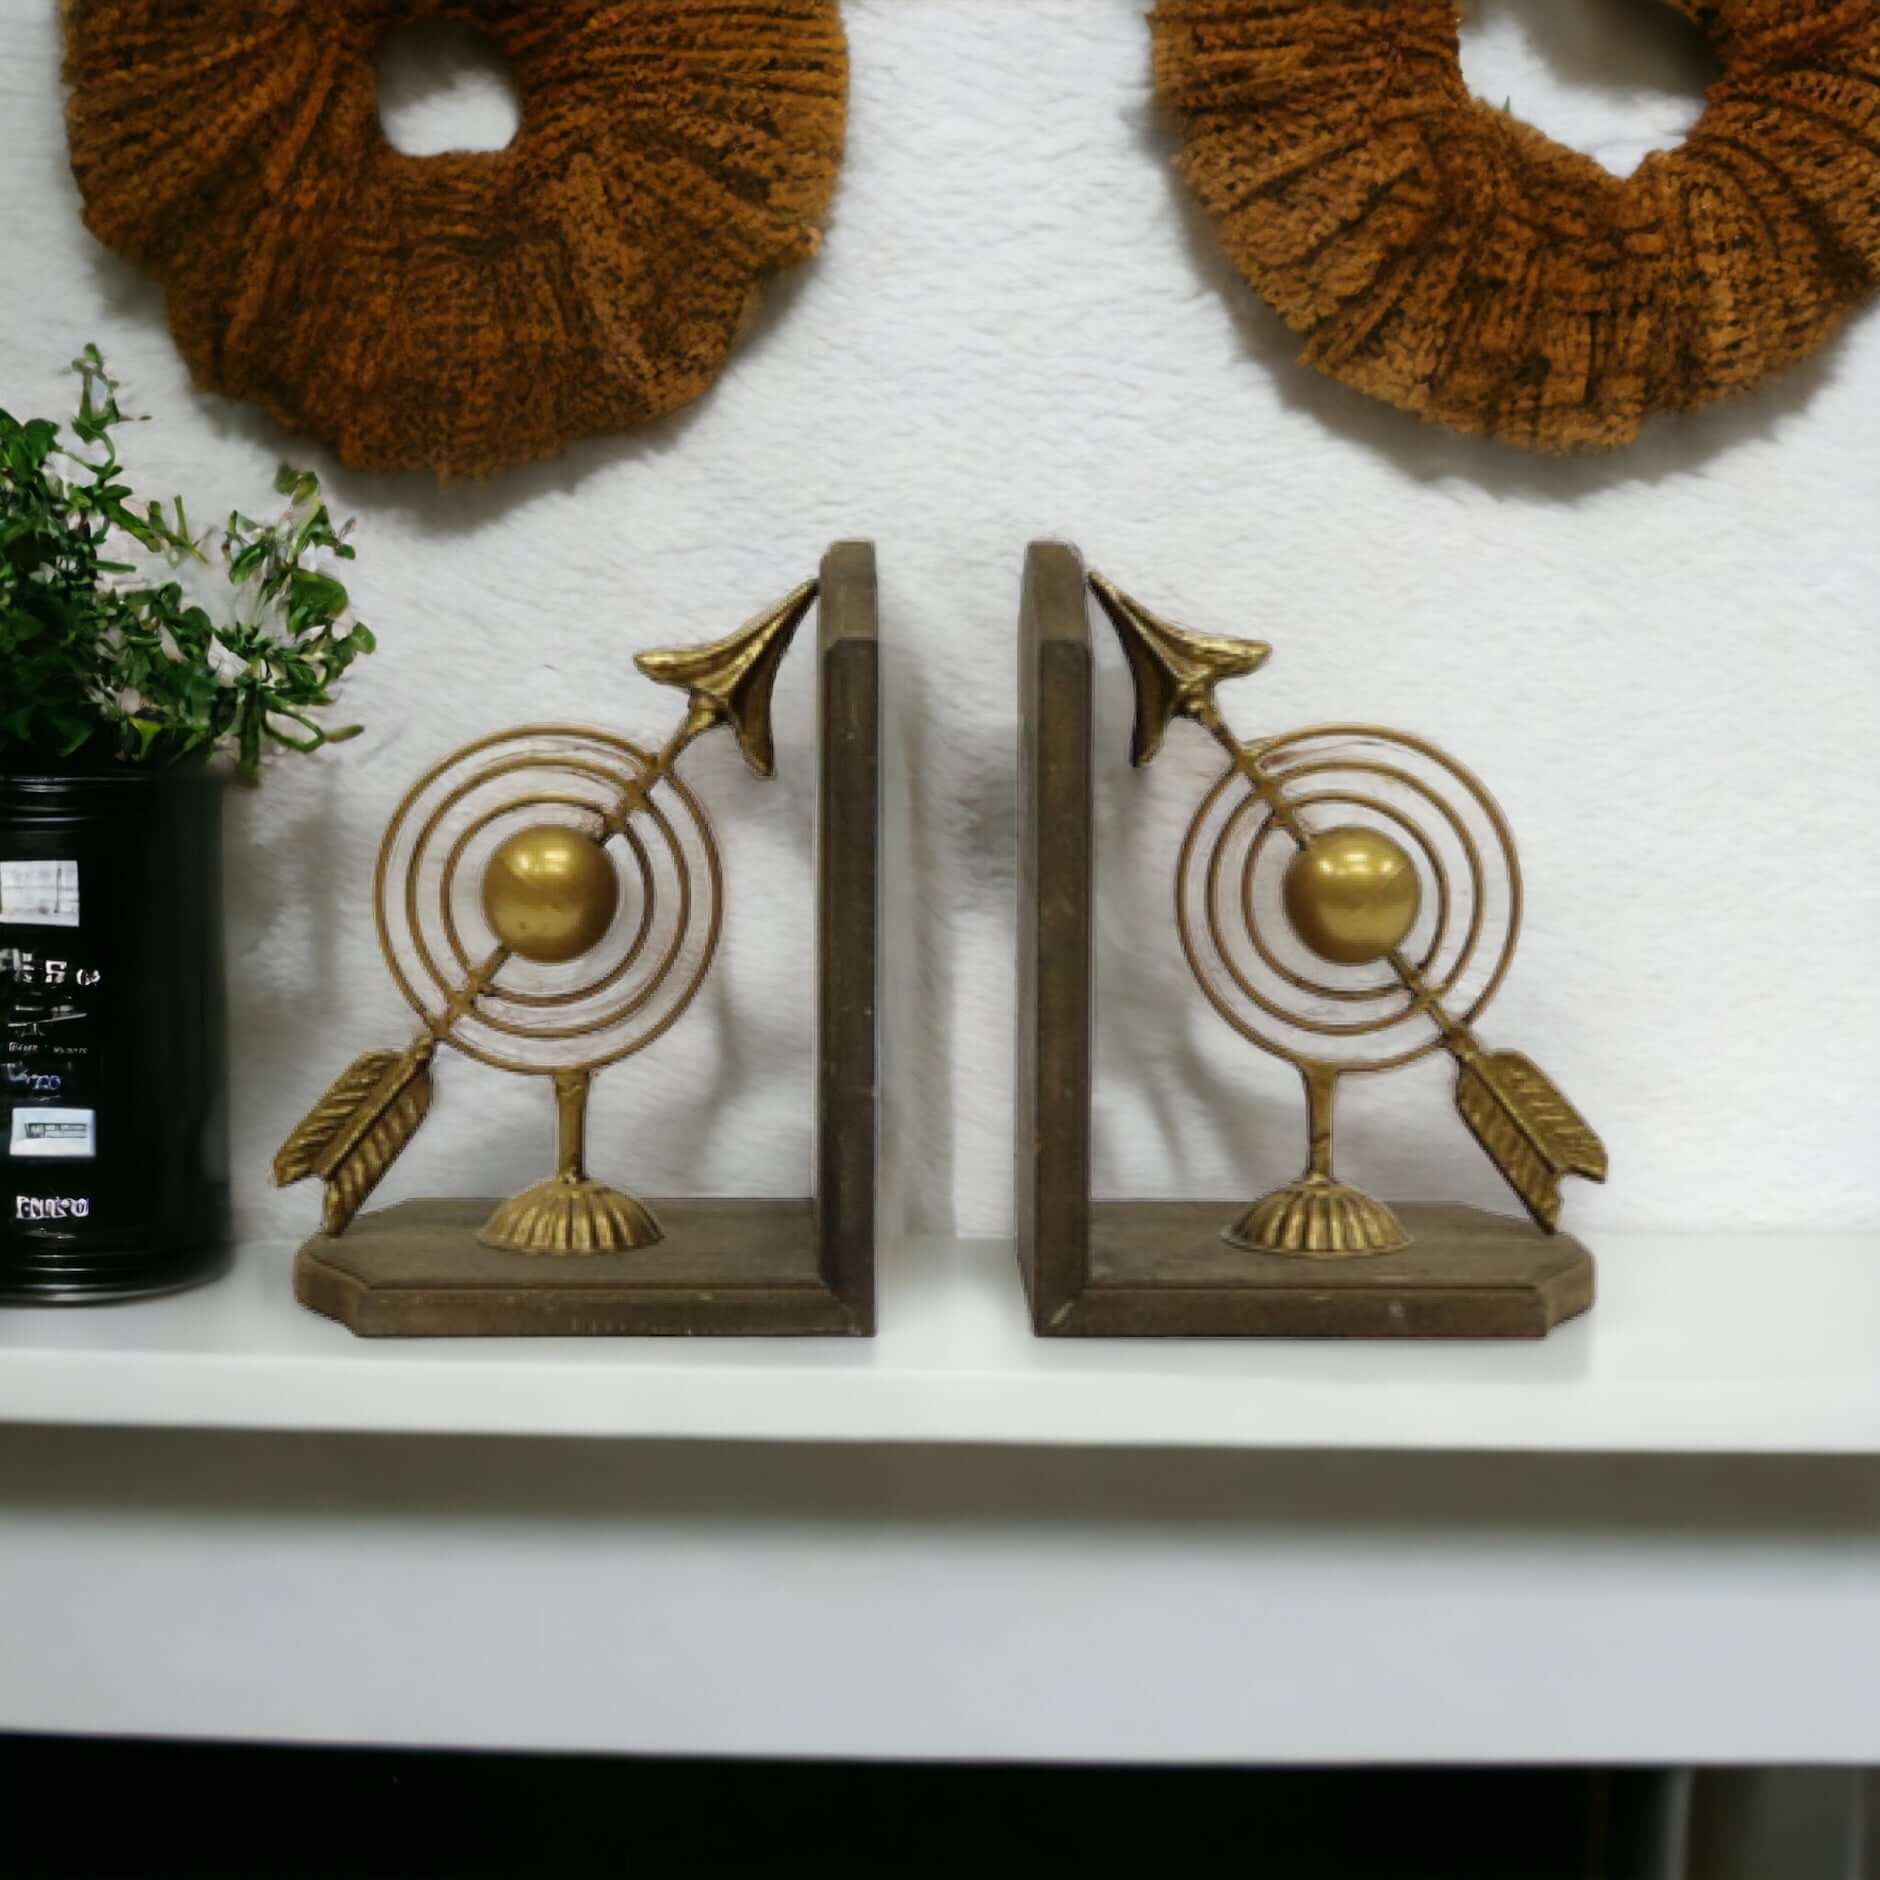 Book Ends Vintage Gold Orb Arrows - The Renmy Store Homewares & Gifts 